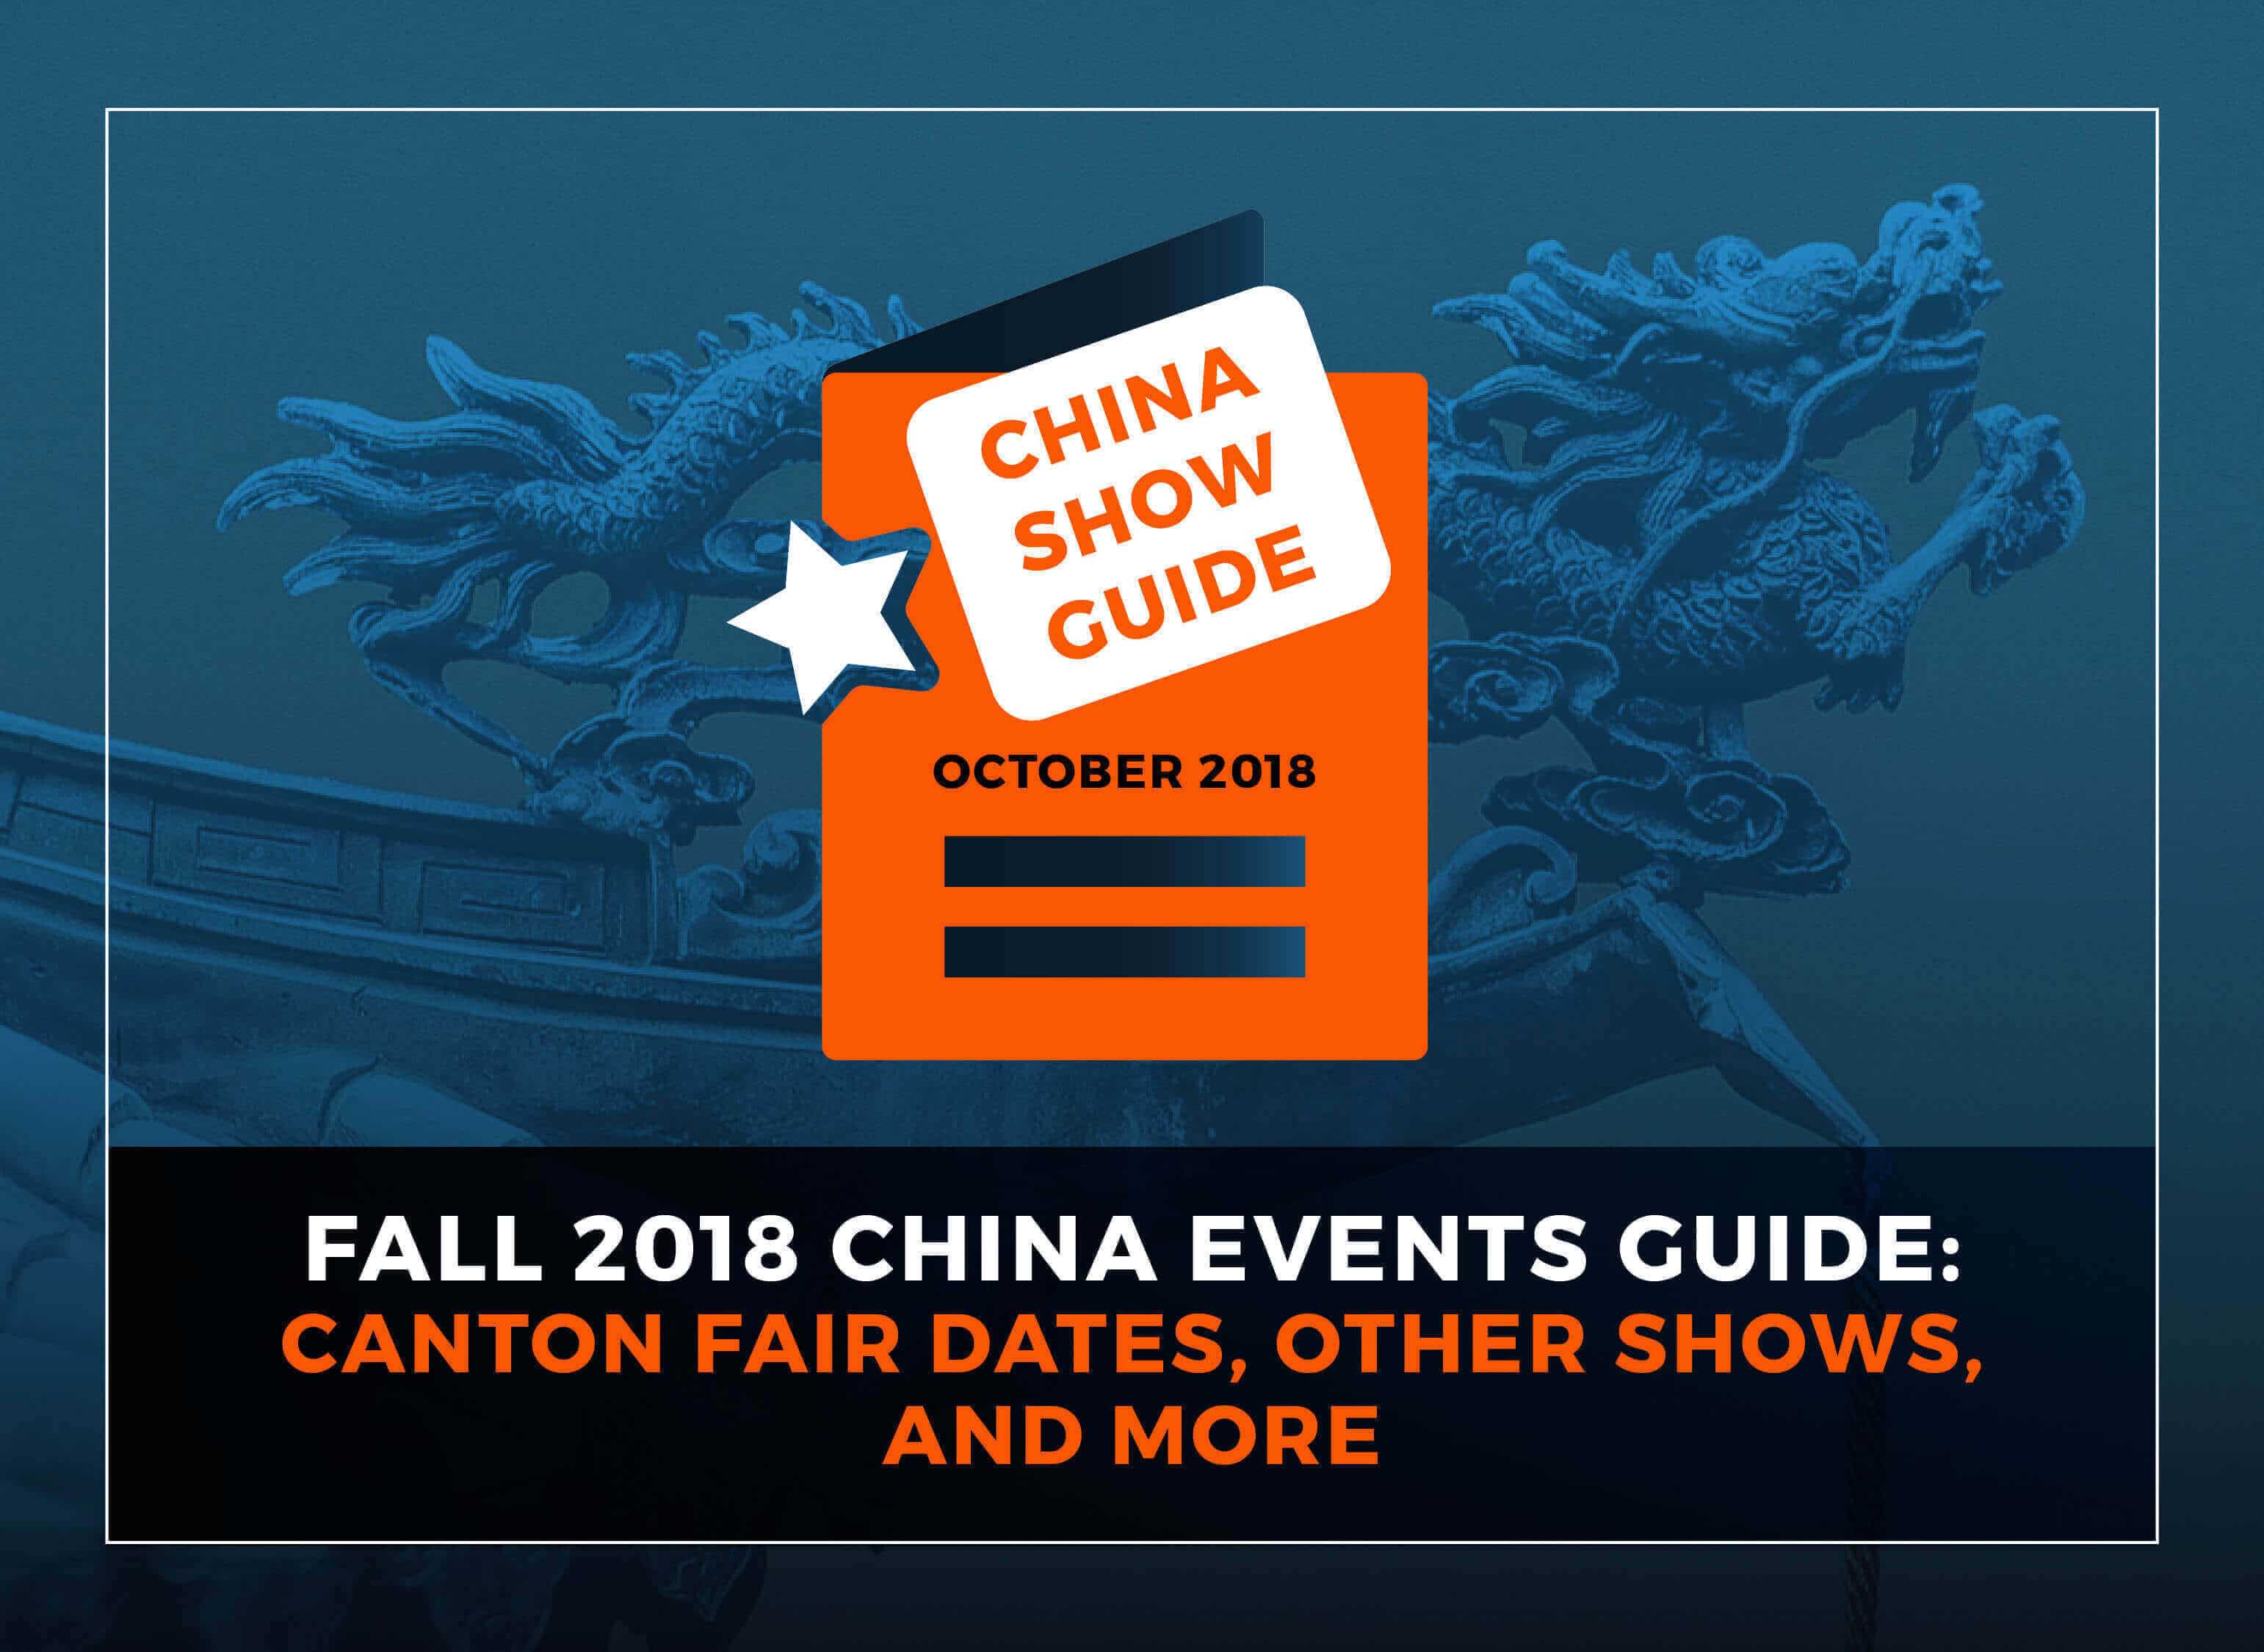 China Show Guide October 2018